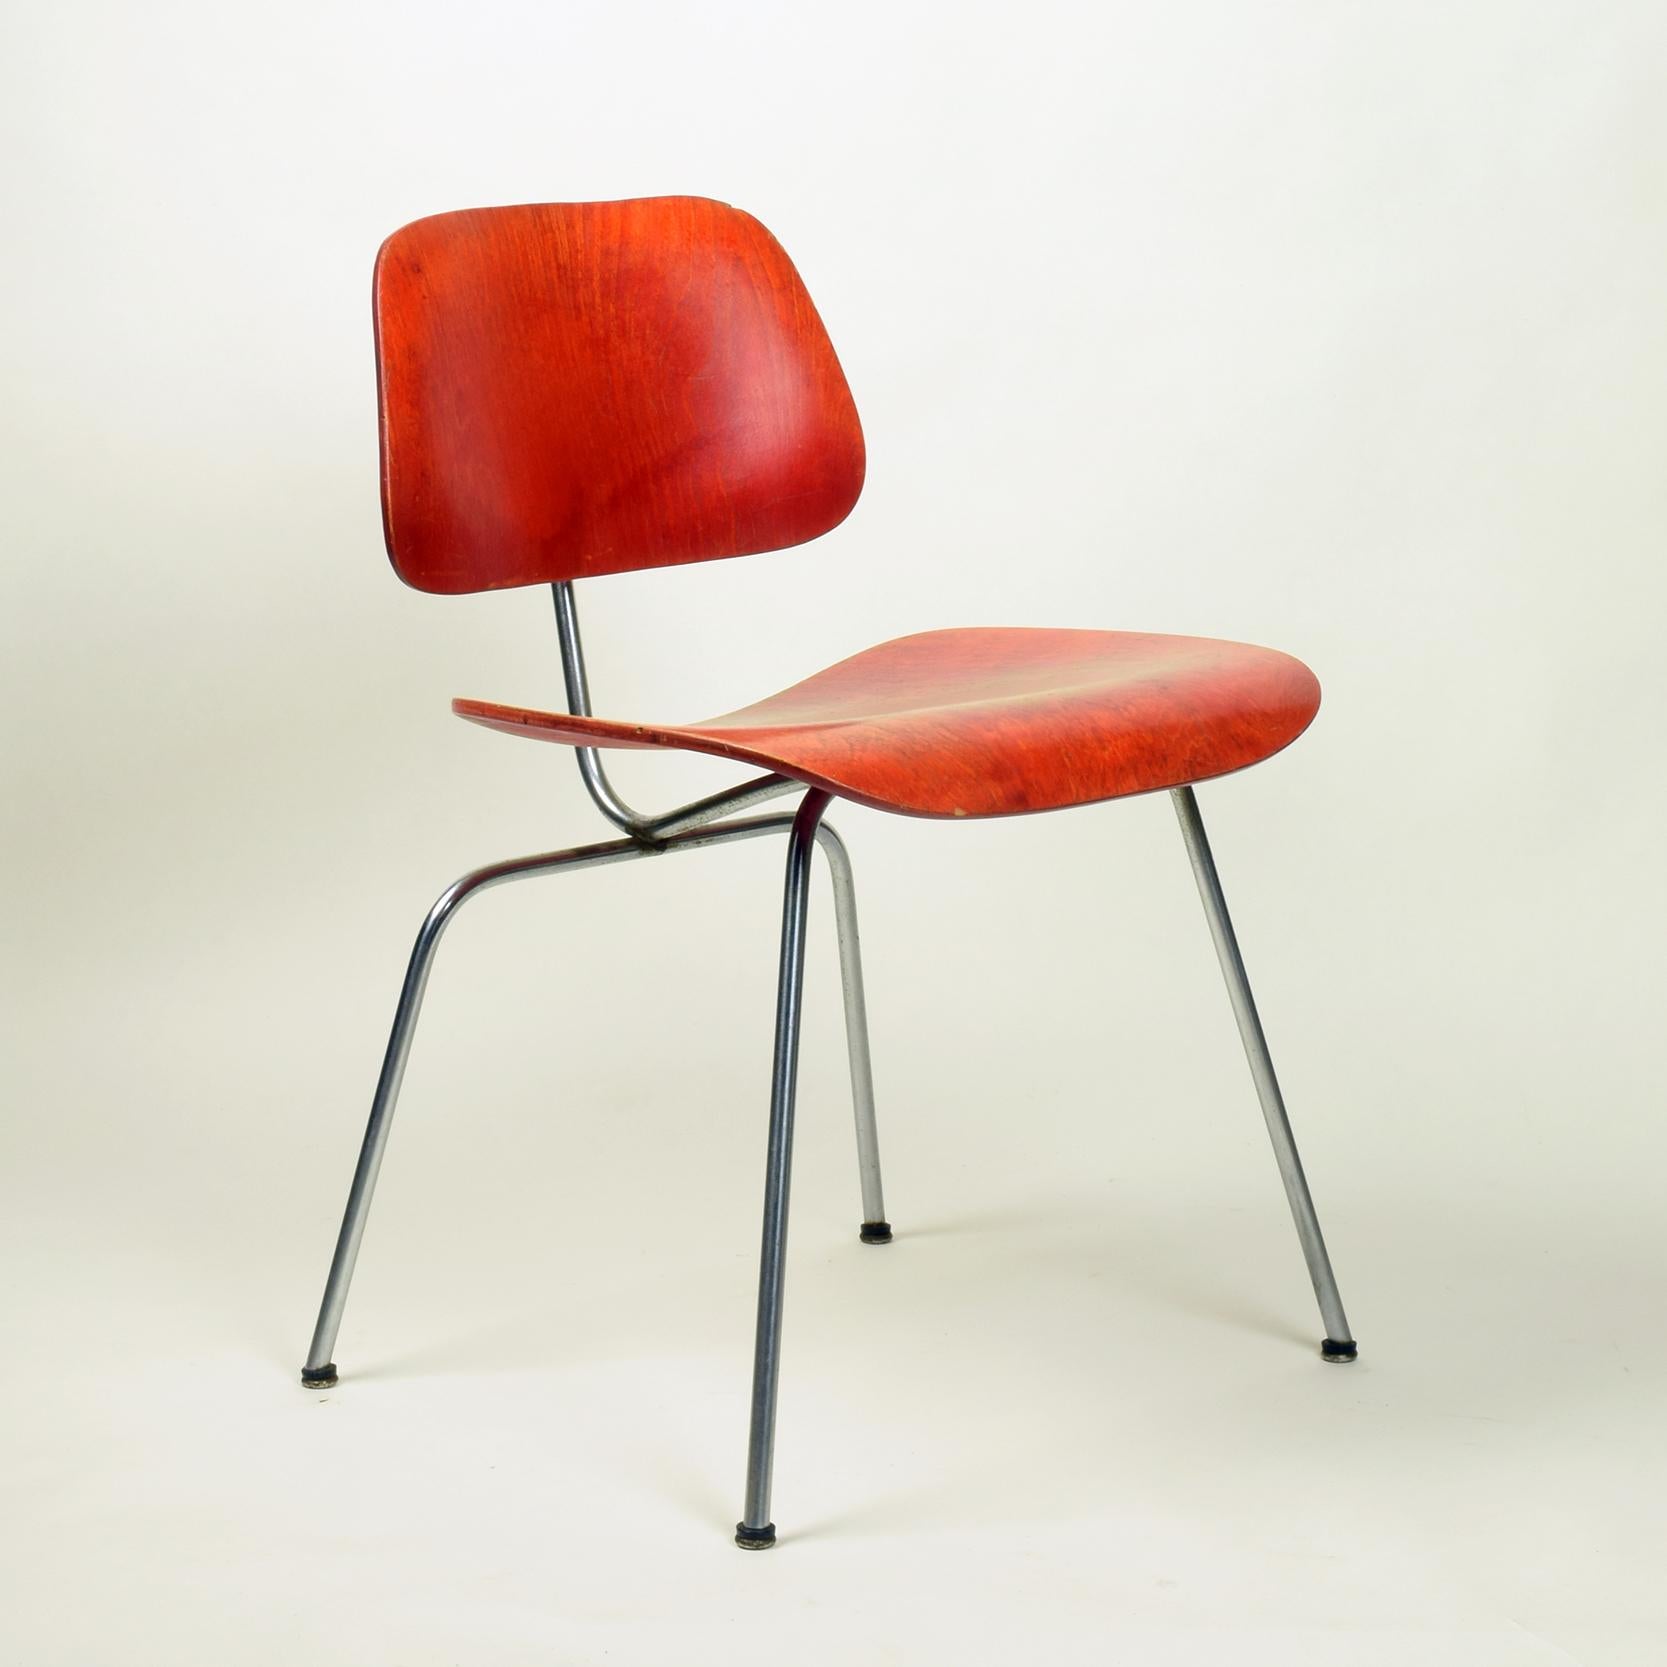 Charles & Ray Eames, 'DCM' Chair for Herman Miller, Stunning Early Version 2